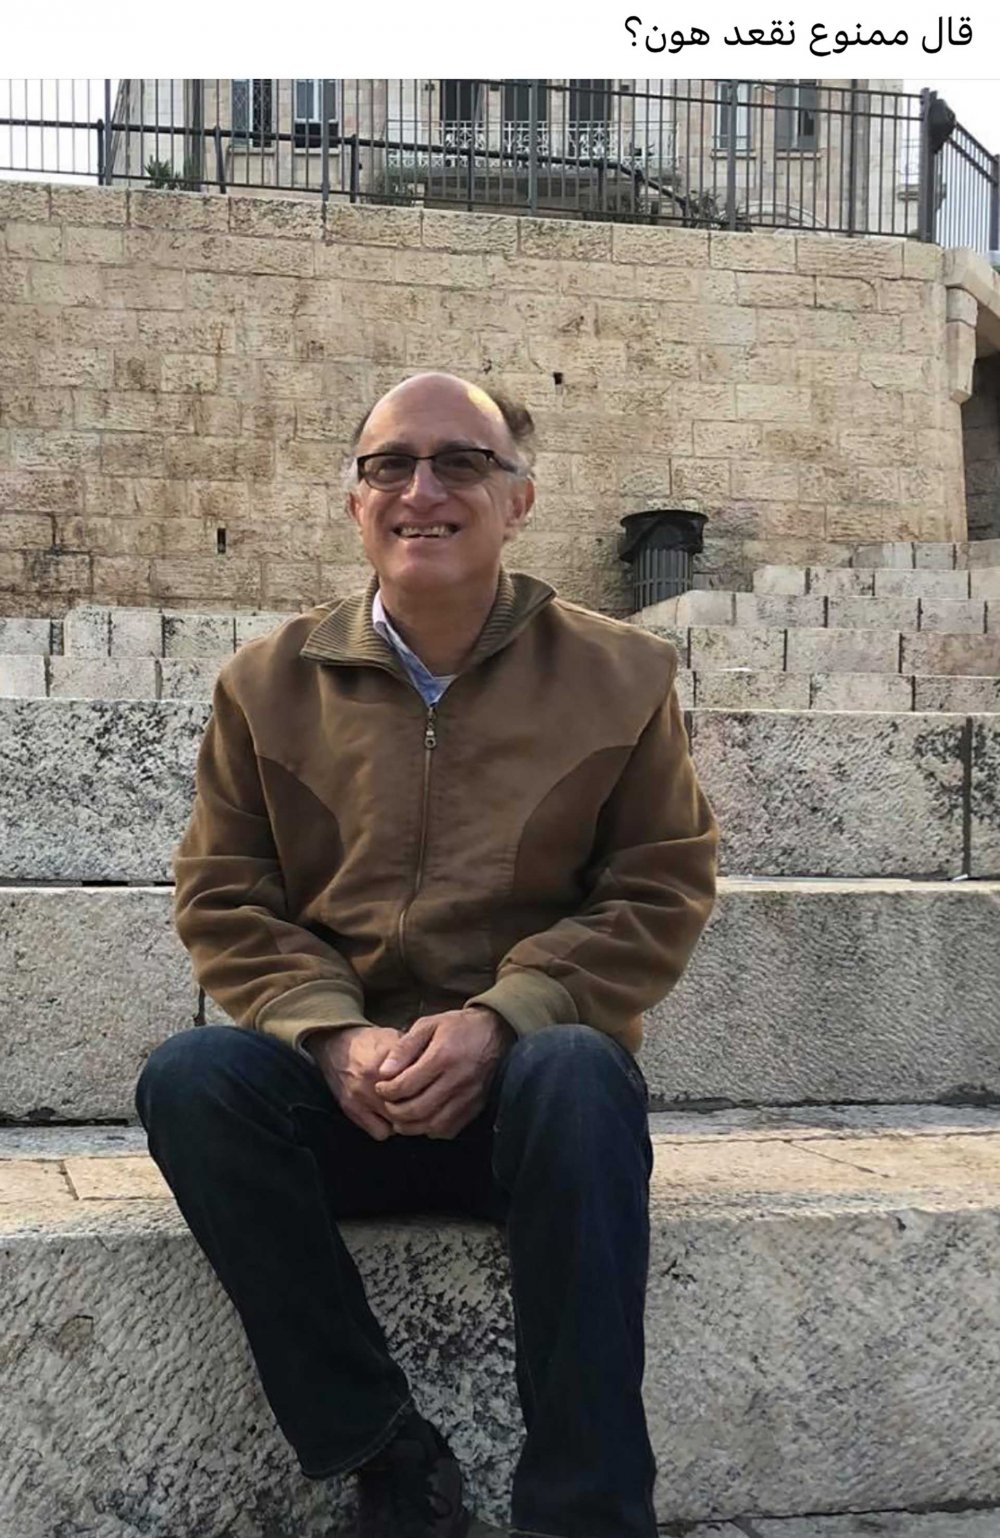 George Sahhar responds to an Israeli order prohibiting Palestinians from sitting on the steps facing Damascus Gate by posting this photo of himself with the caption “Apparently we’re not allowed to sit here?”